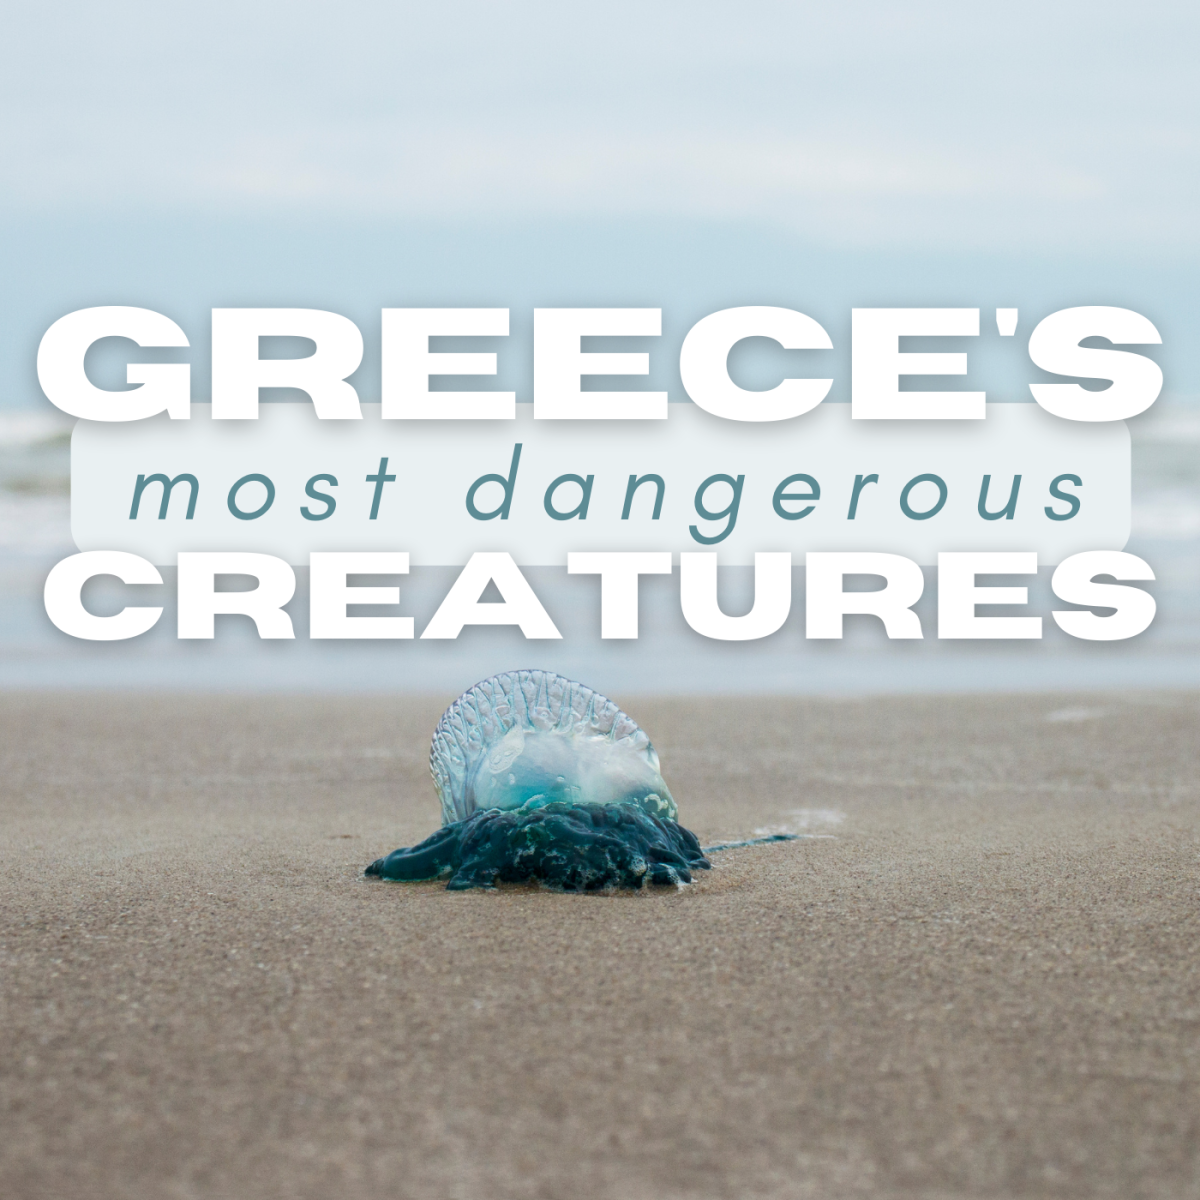 7 of Greece's most deadly animals